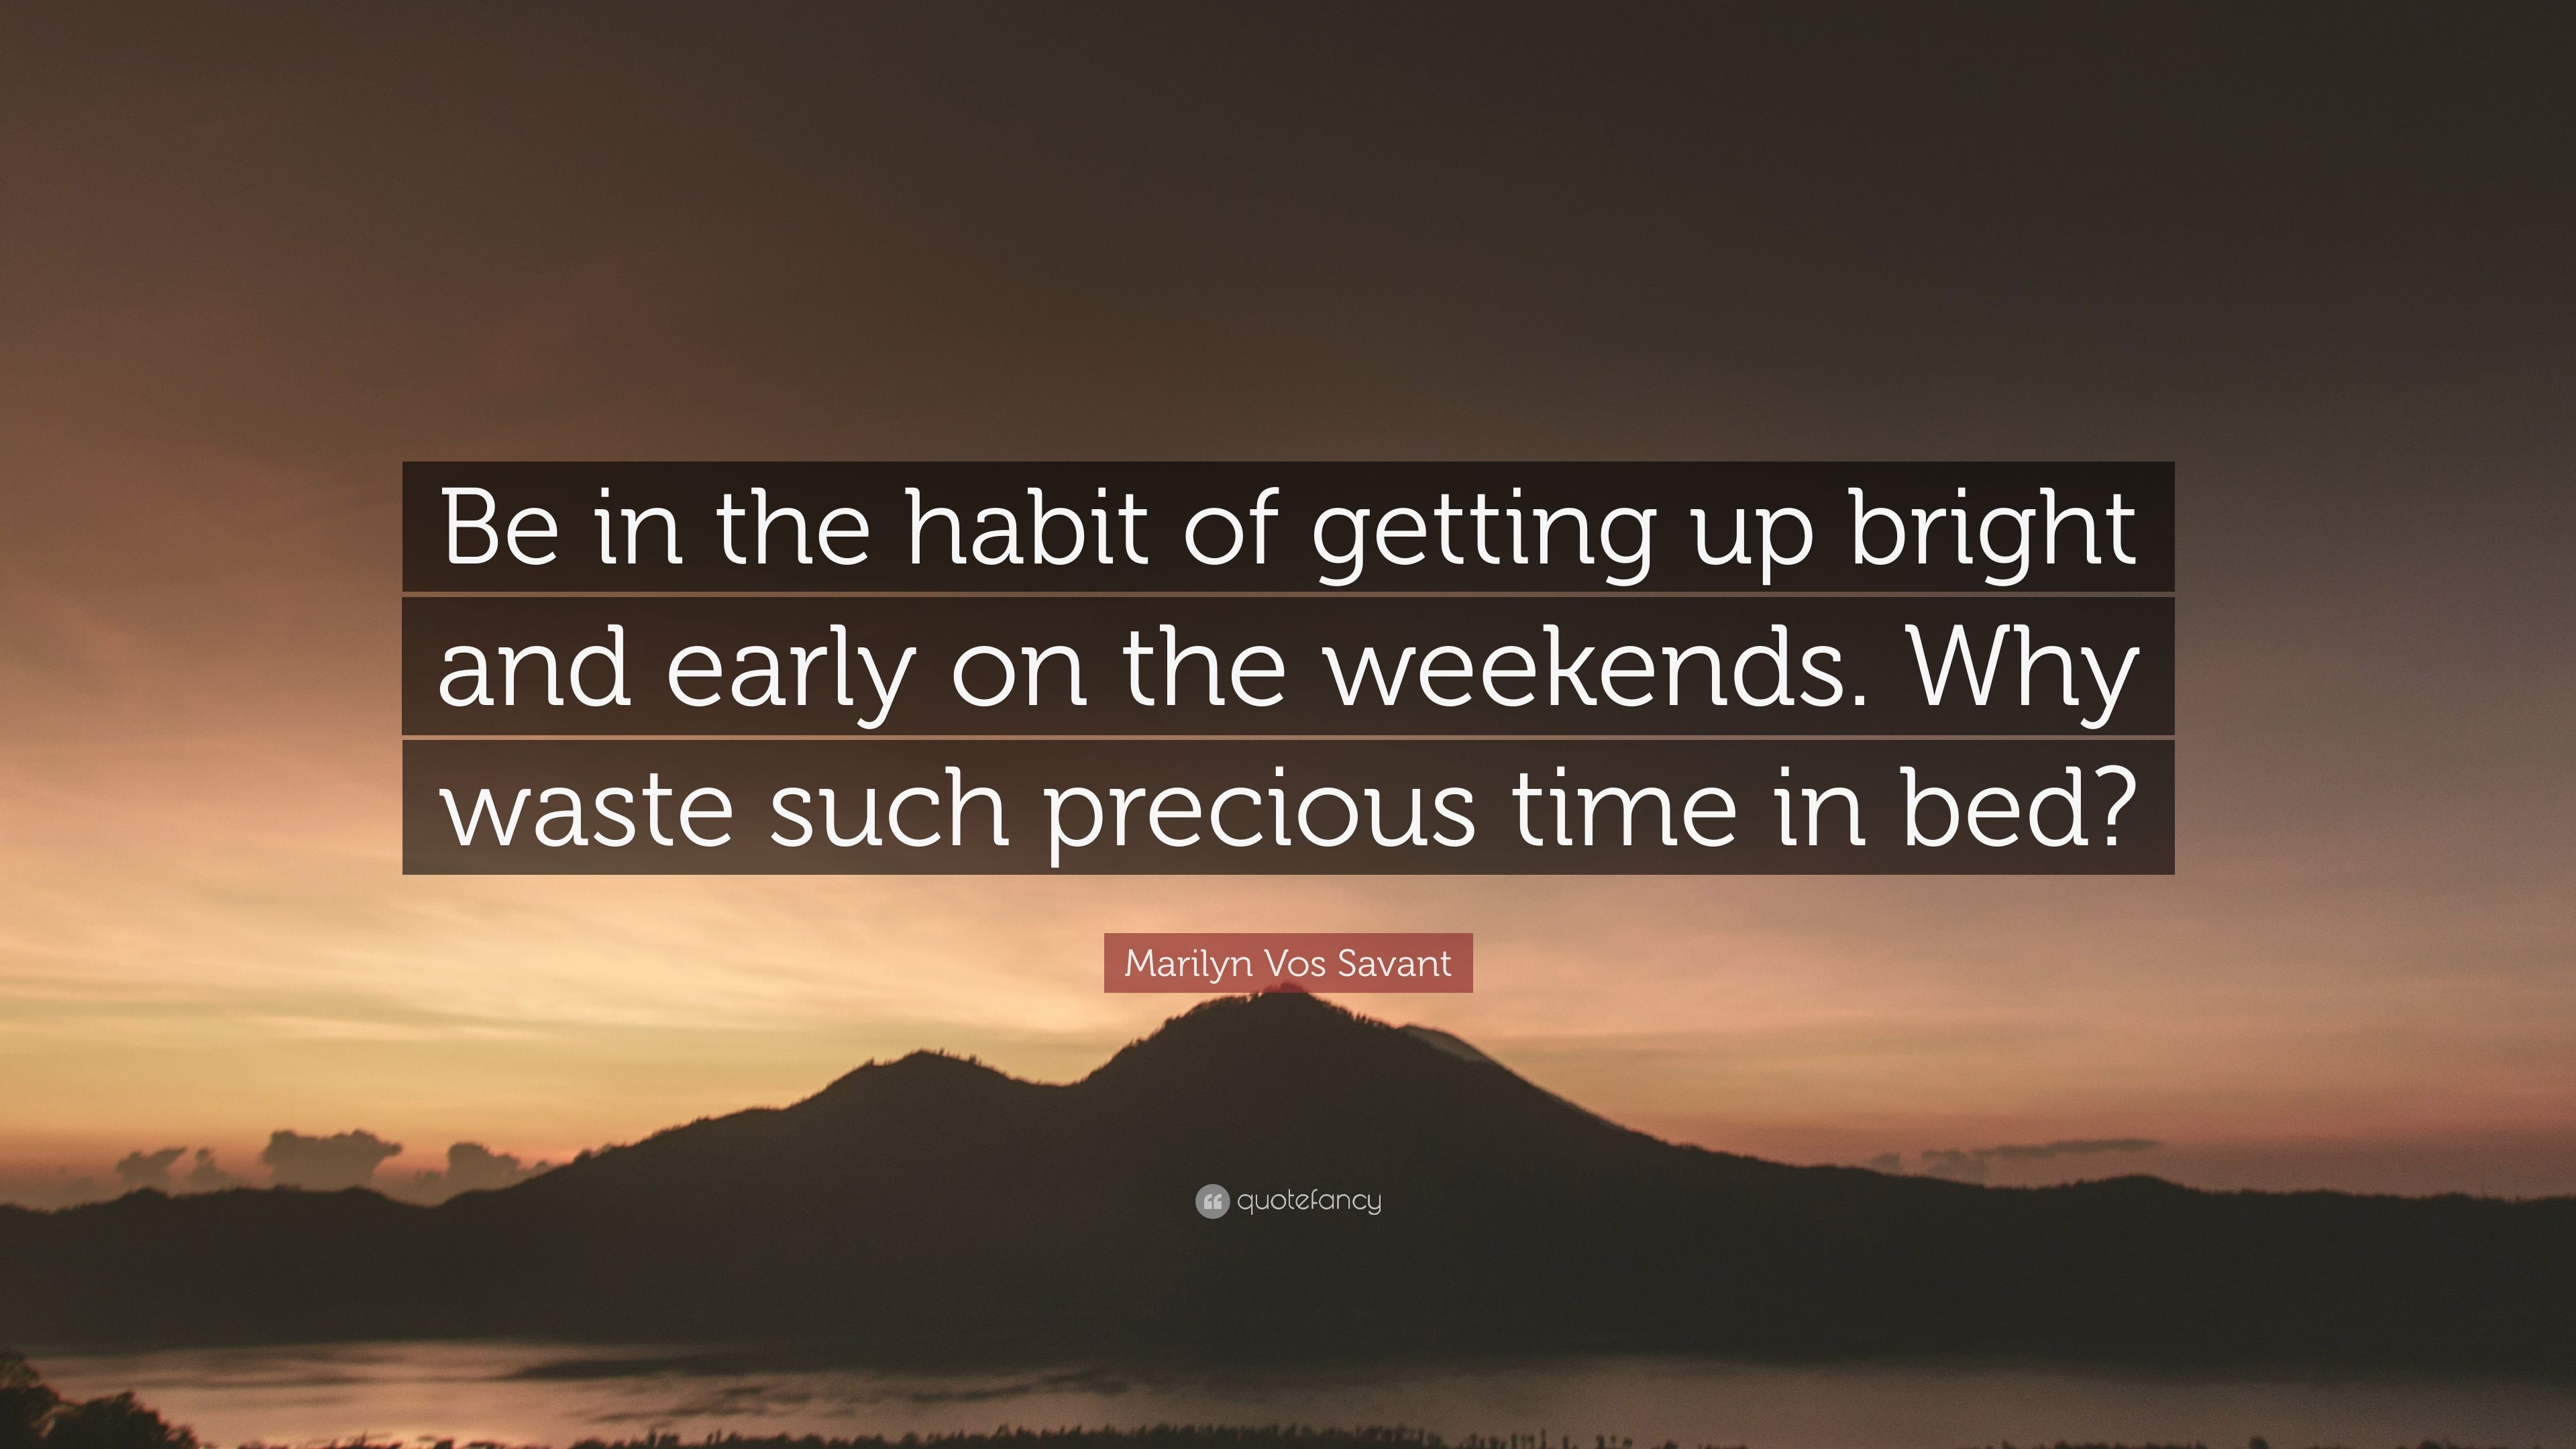 Marilyn Vos Savant Quote: “Be in the habit of getting up bright and ...